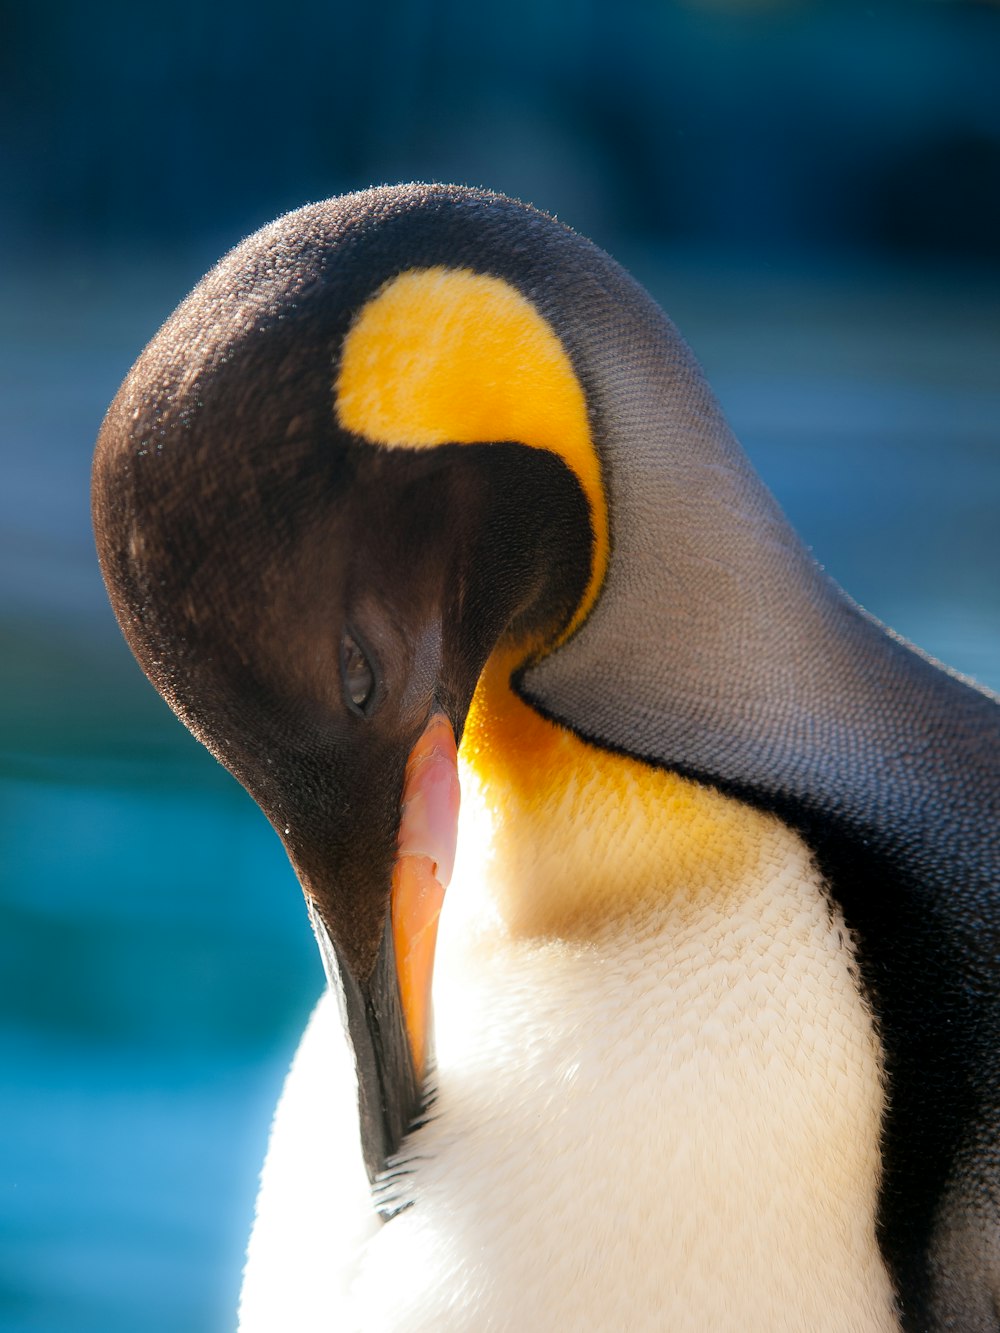 a close up of a penguin with its mouth open